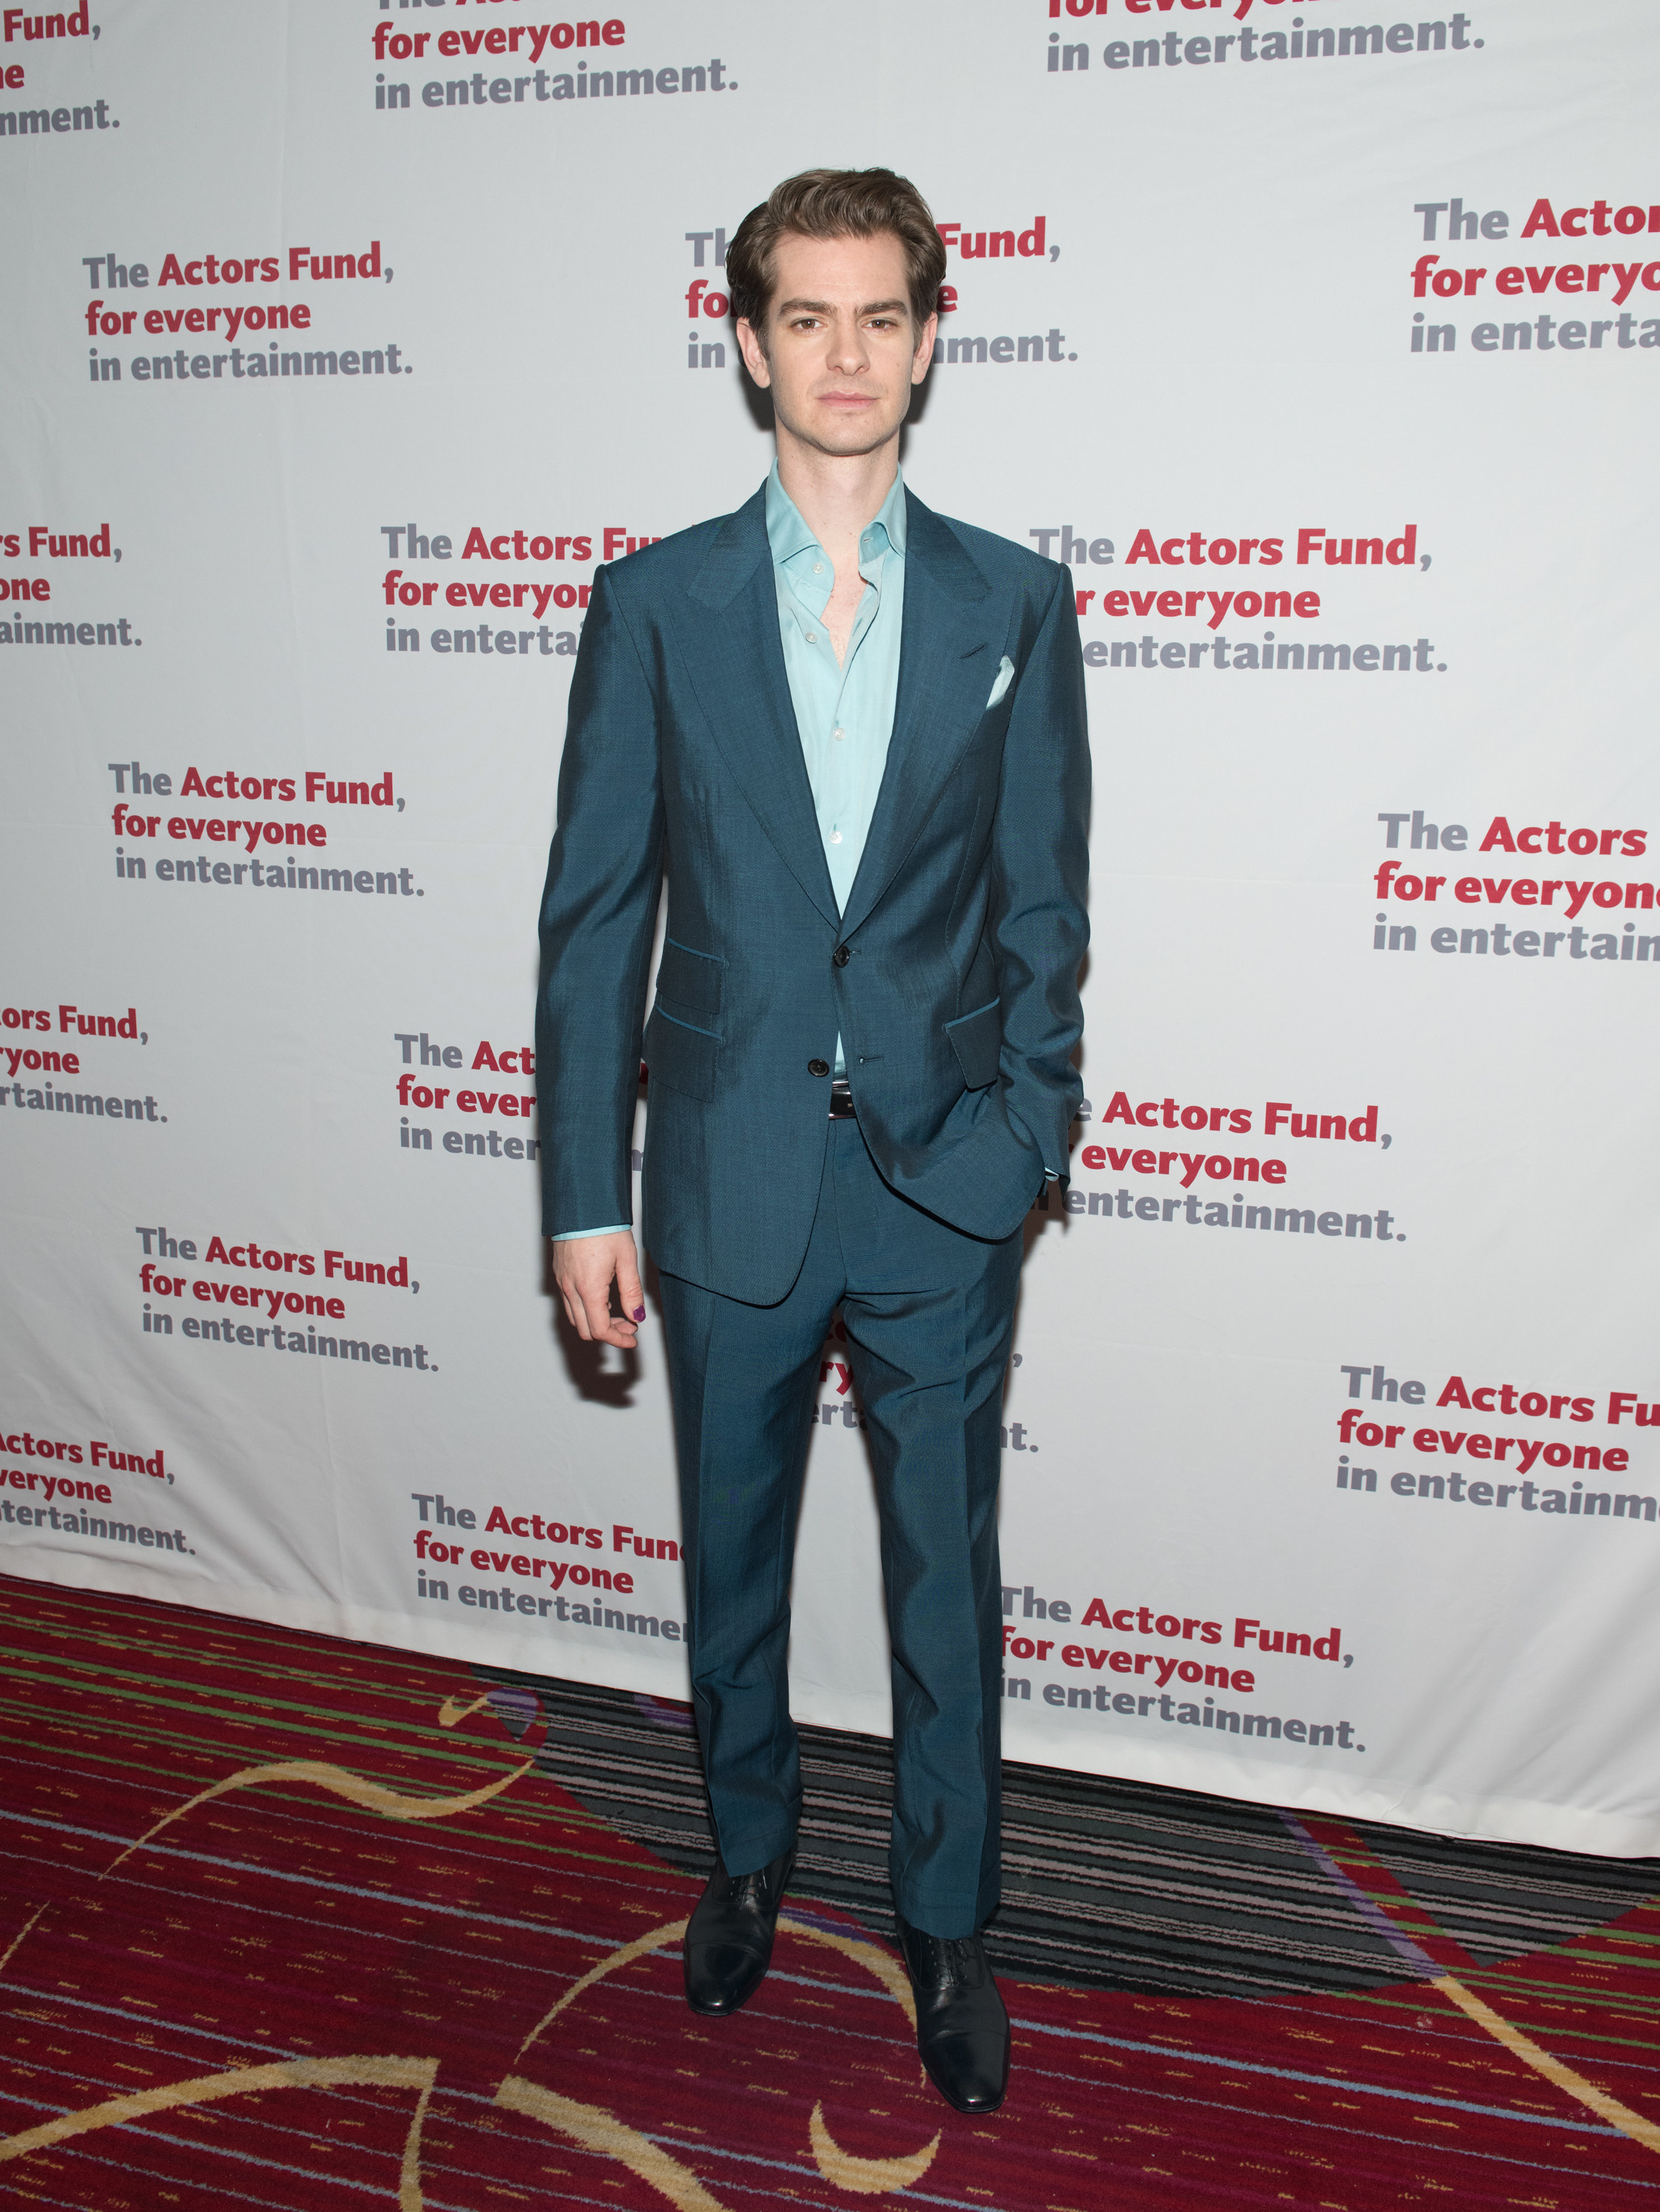 Andrew wears a turquoise suit and light blue shirt